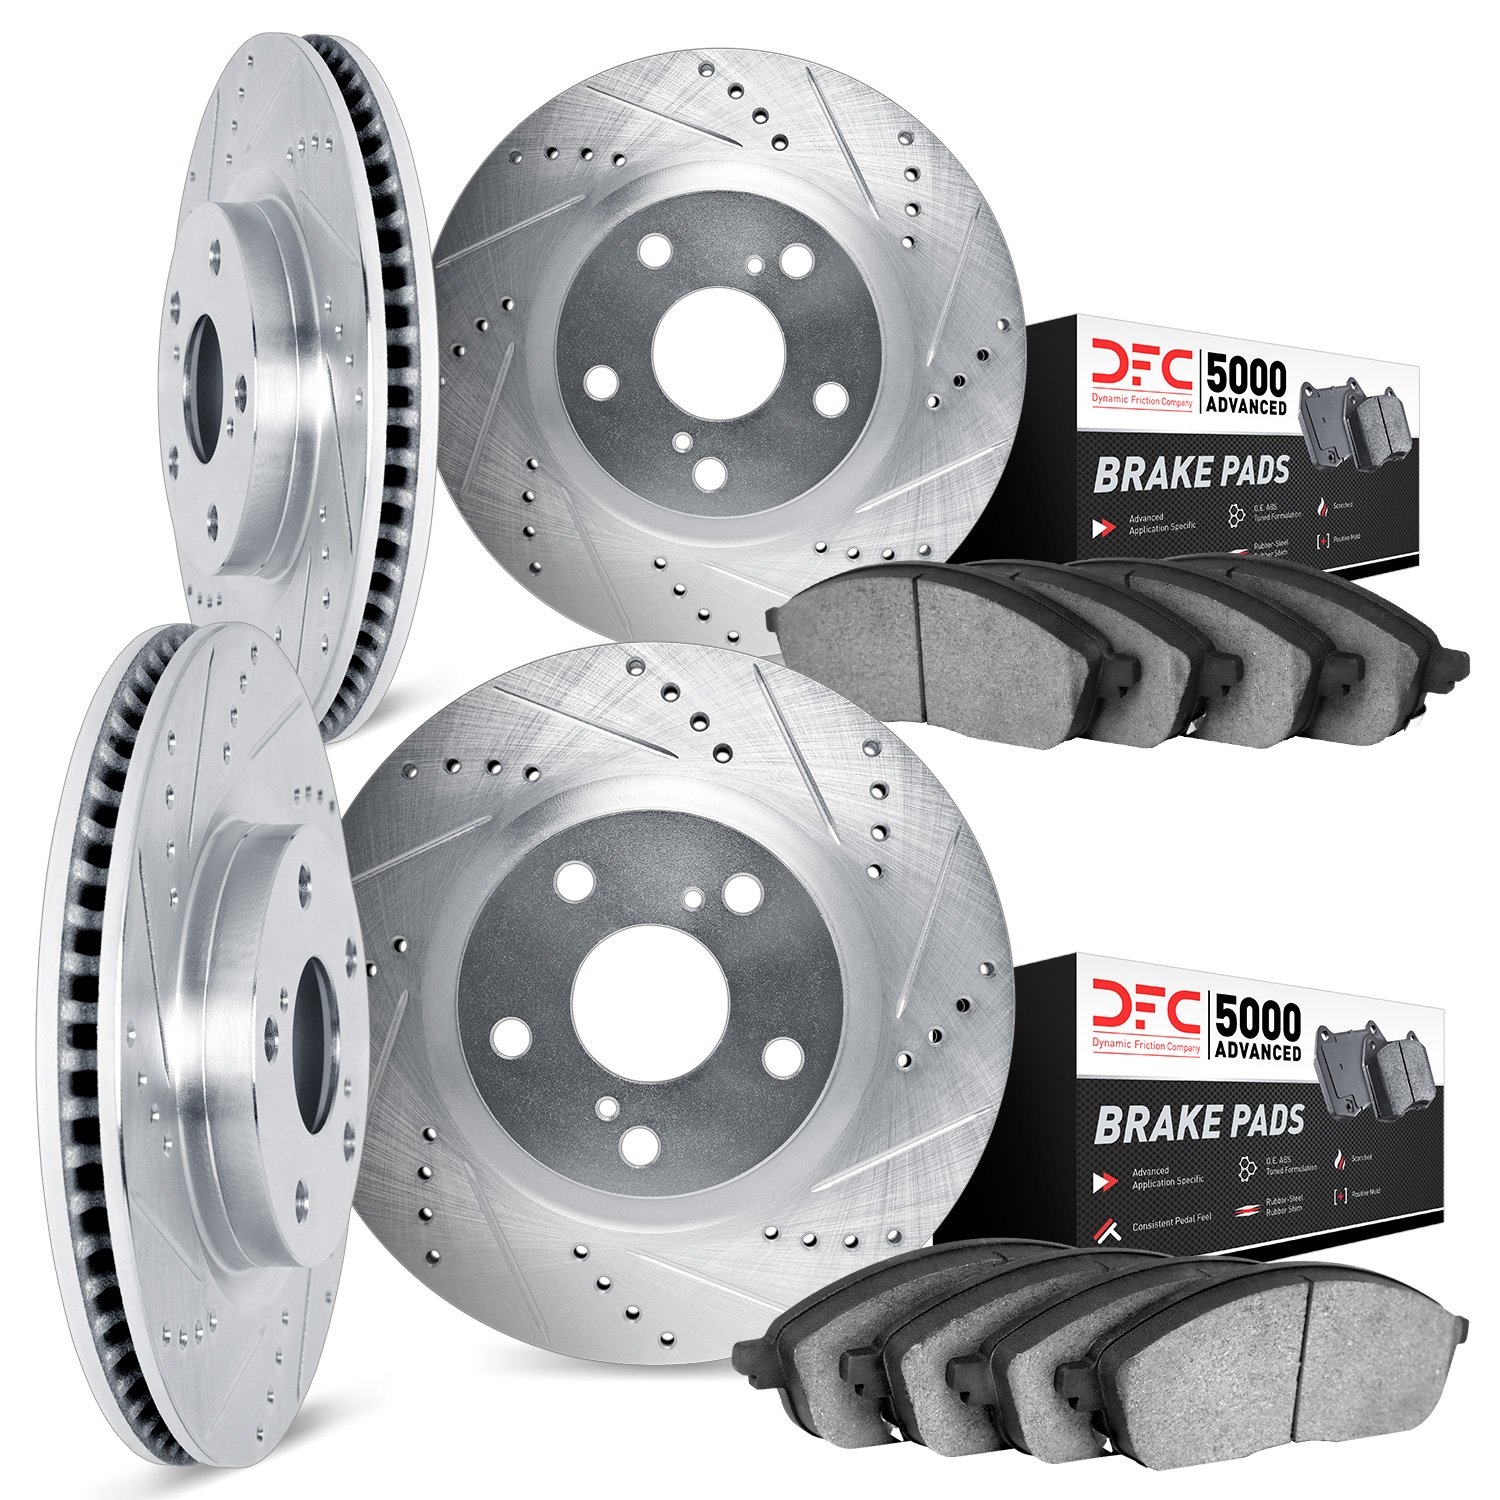 7504-13006 Drilled/Slotted Brake Rotors w/5000 Advanced Brake Pads Kit [Silver], 2003-2004 Subaru, Position: Front and Rear